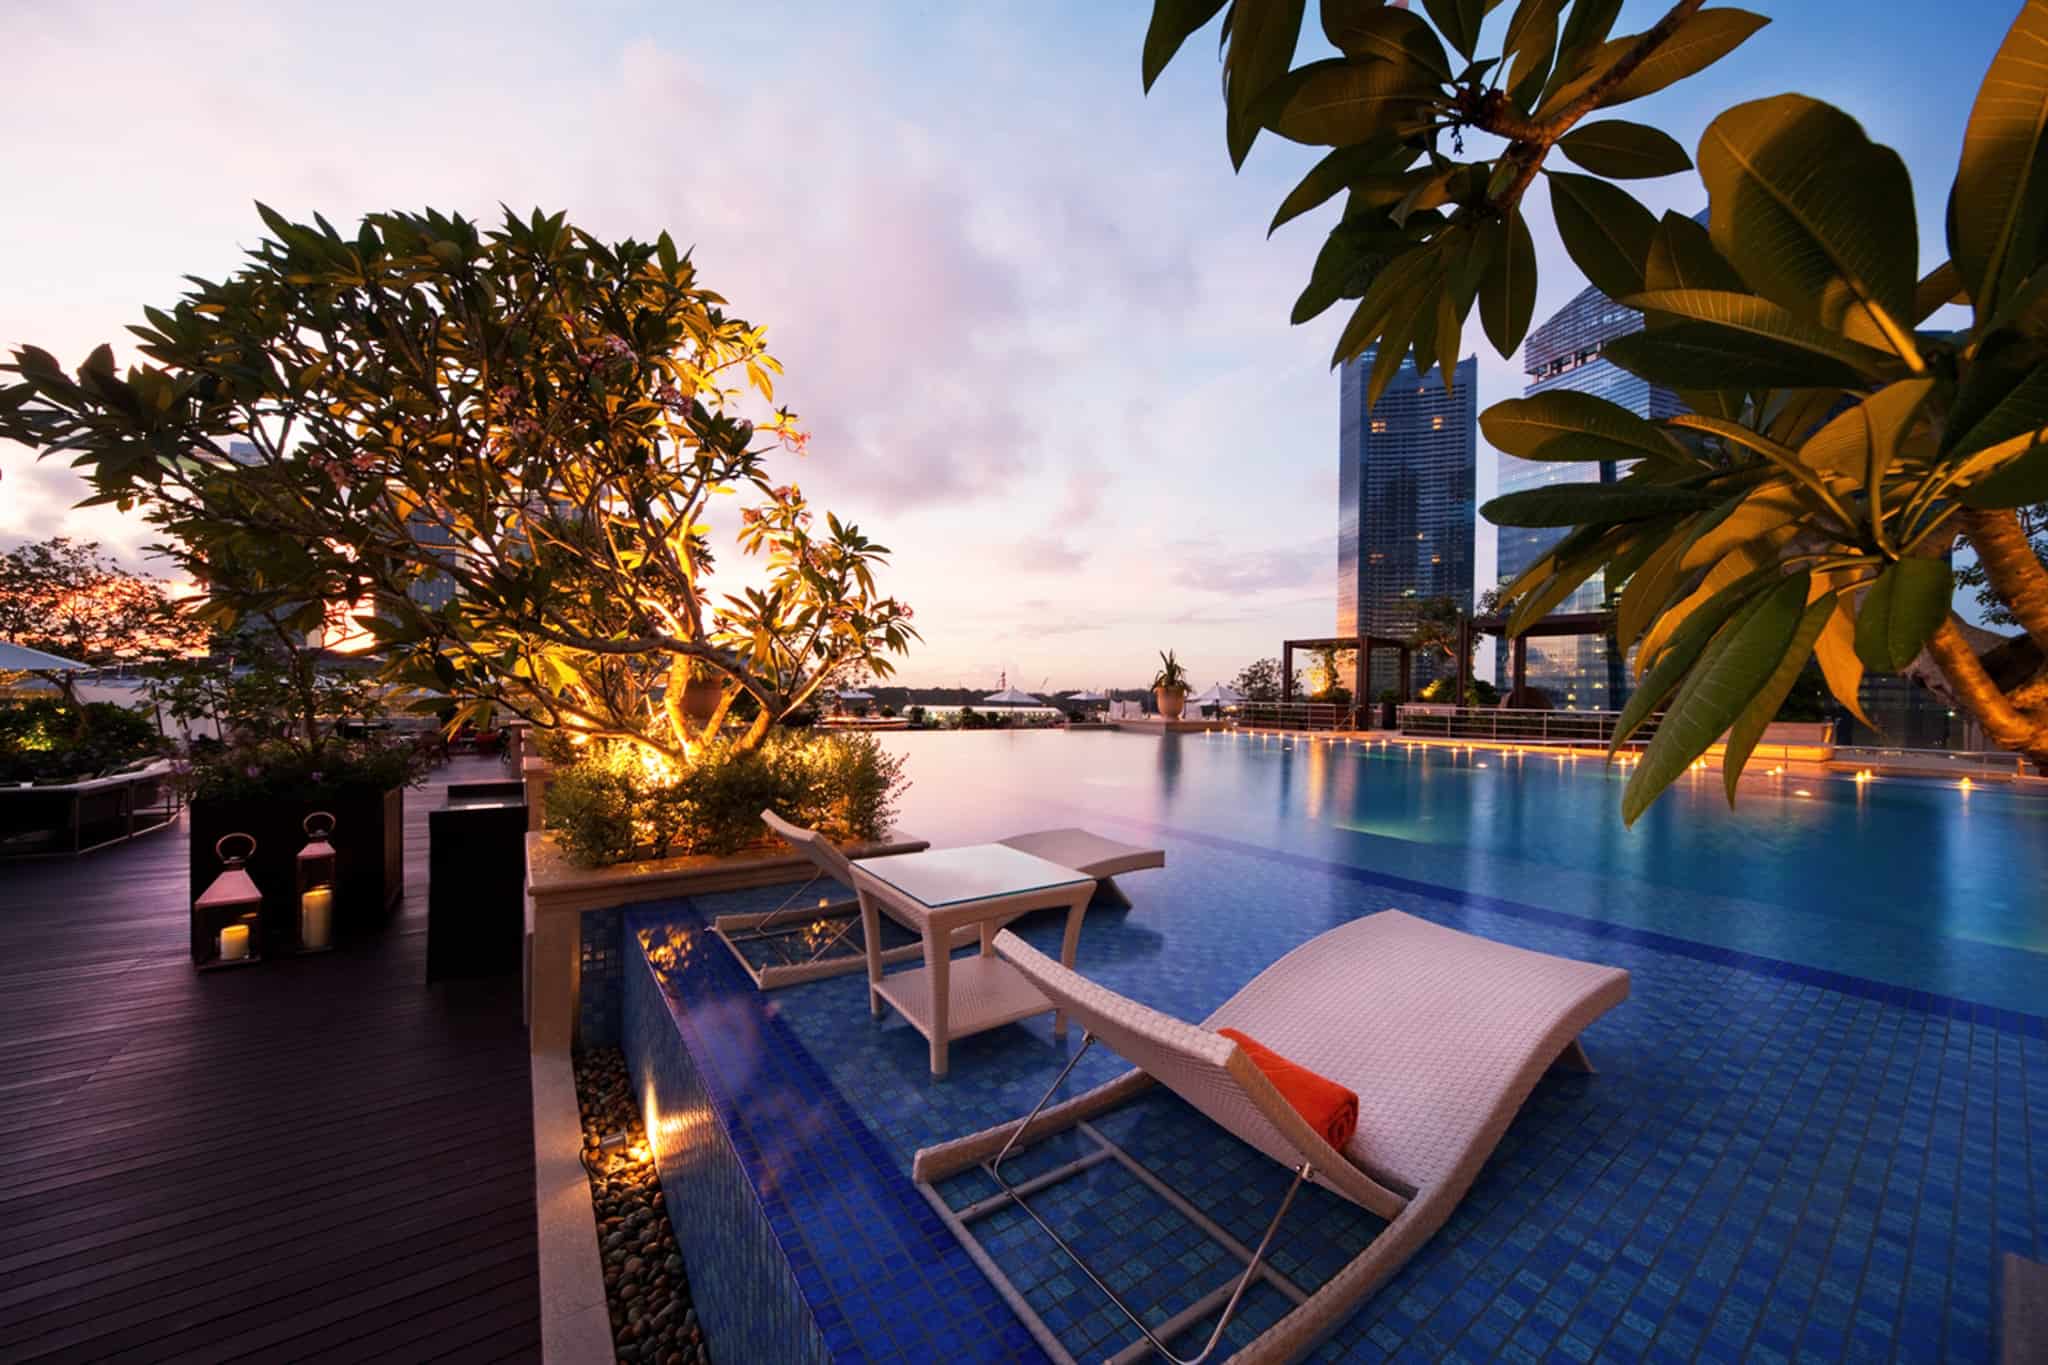 Rooftop Infinity Pool - The Fullerton Bay Hotel Singapore